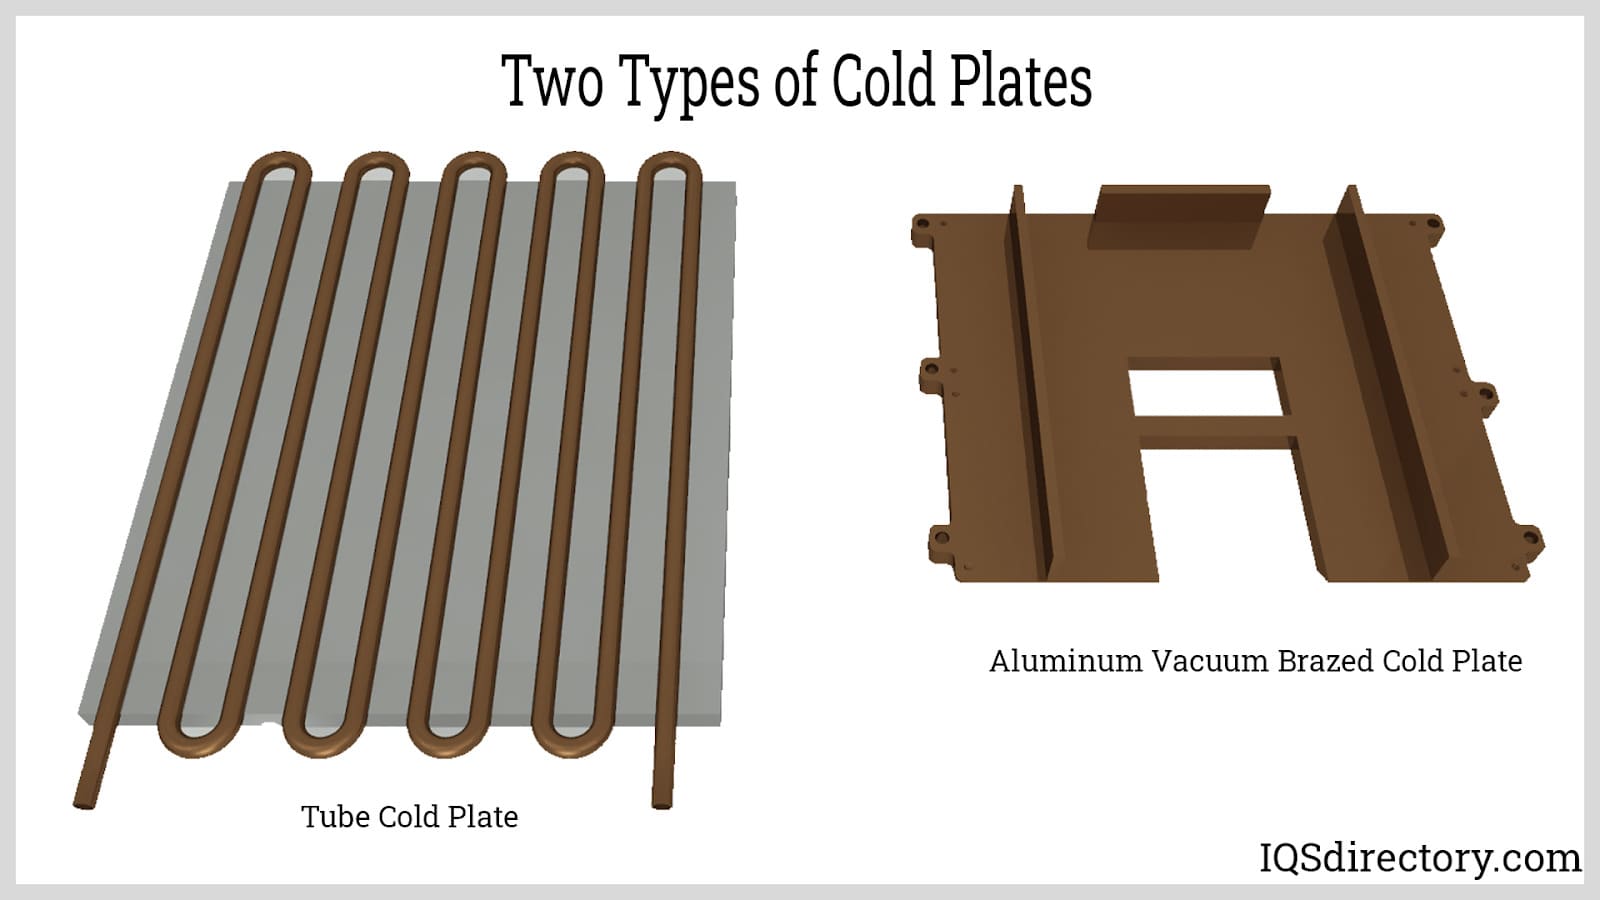 Two Types of Cold Plates